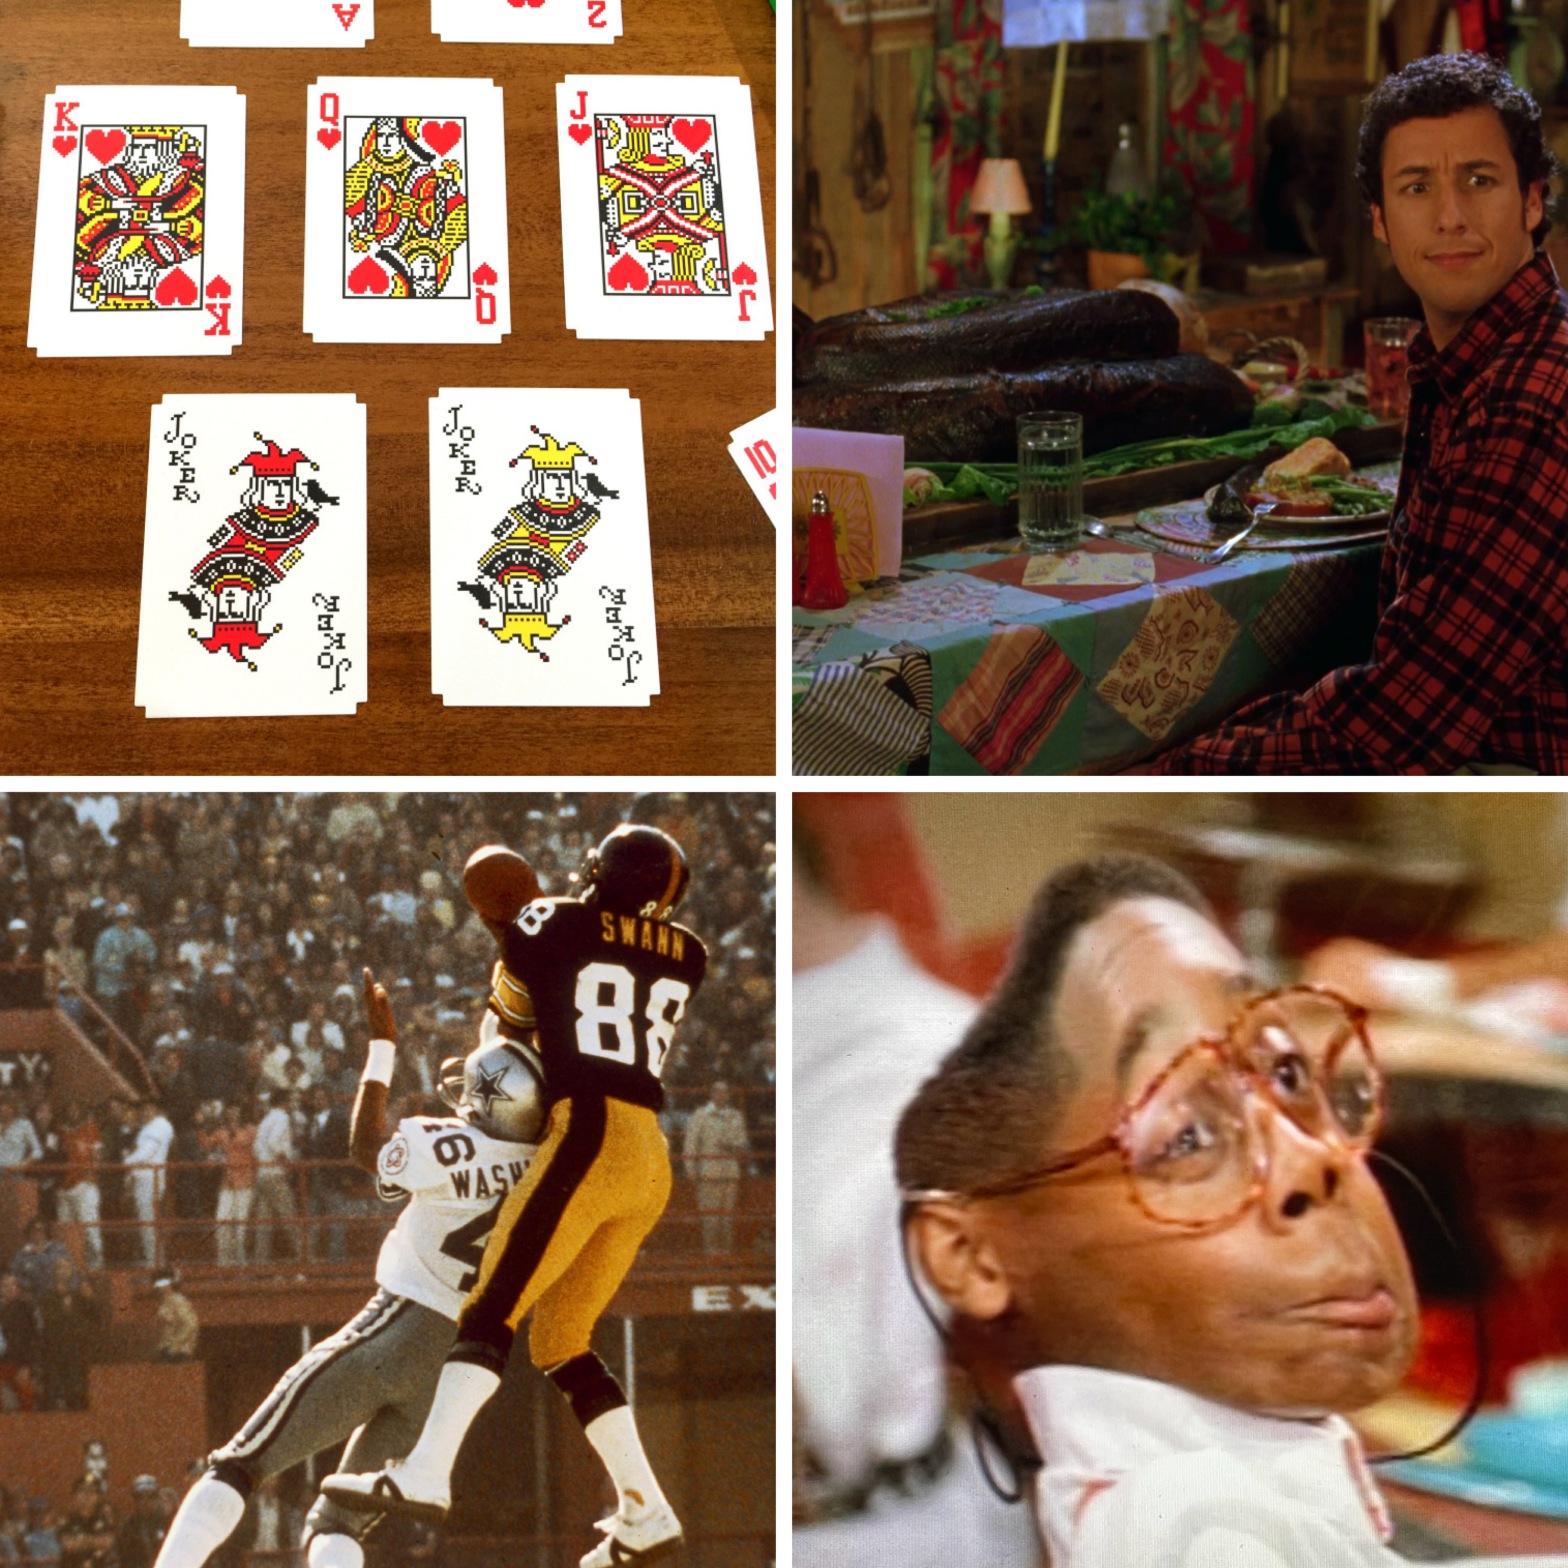 A deck of Microsoft Solitaire cards, Adam Sandler and a snake's knee in The Waterboy, Lynn Swann winning the Super Bowl MVP, and a trippy mid-water dissolve of Steve Urkel.